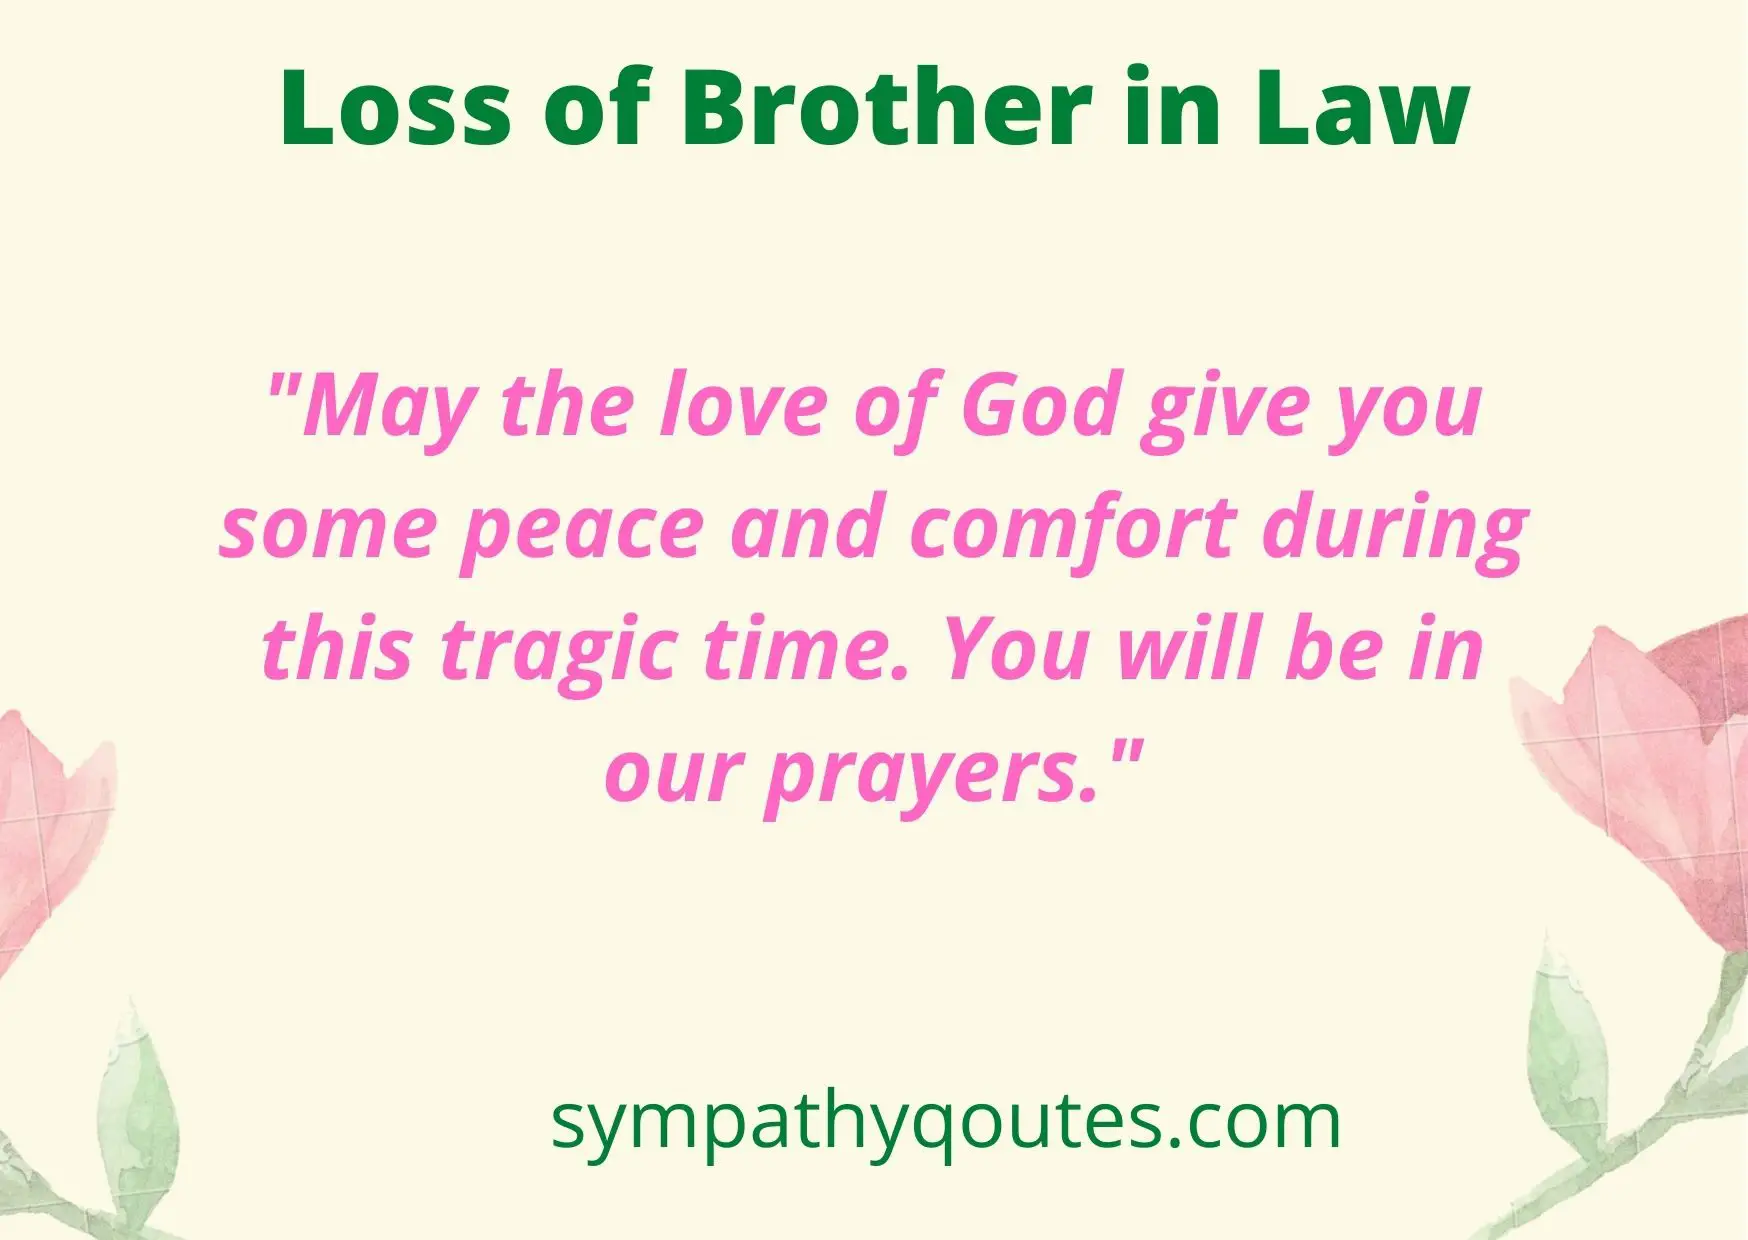 Condolence Messages for Loss of Brother in Law